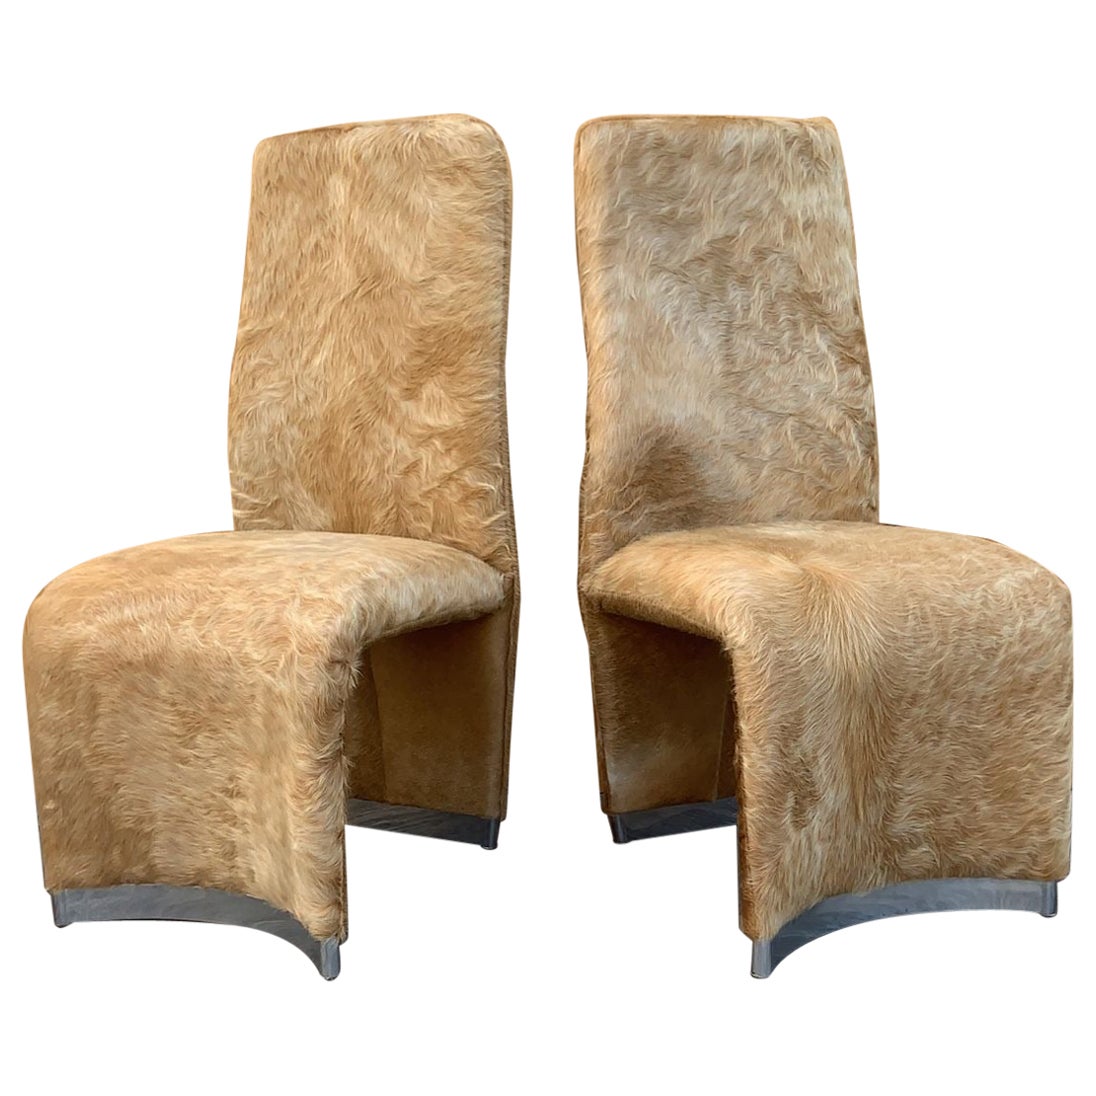 Post Modern DIA Ribbon Side Chairs with Chrome Base Trim In Cream Cowhide - Pair For Sale